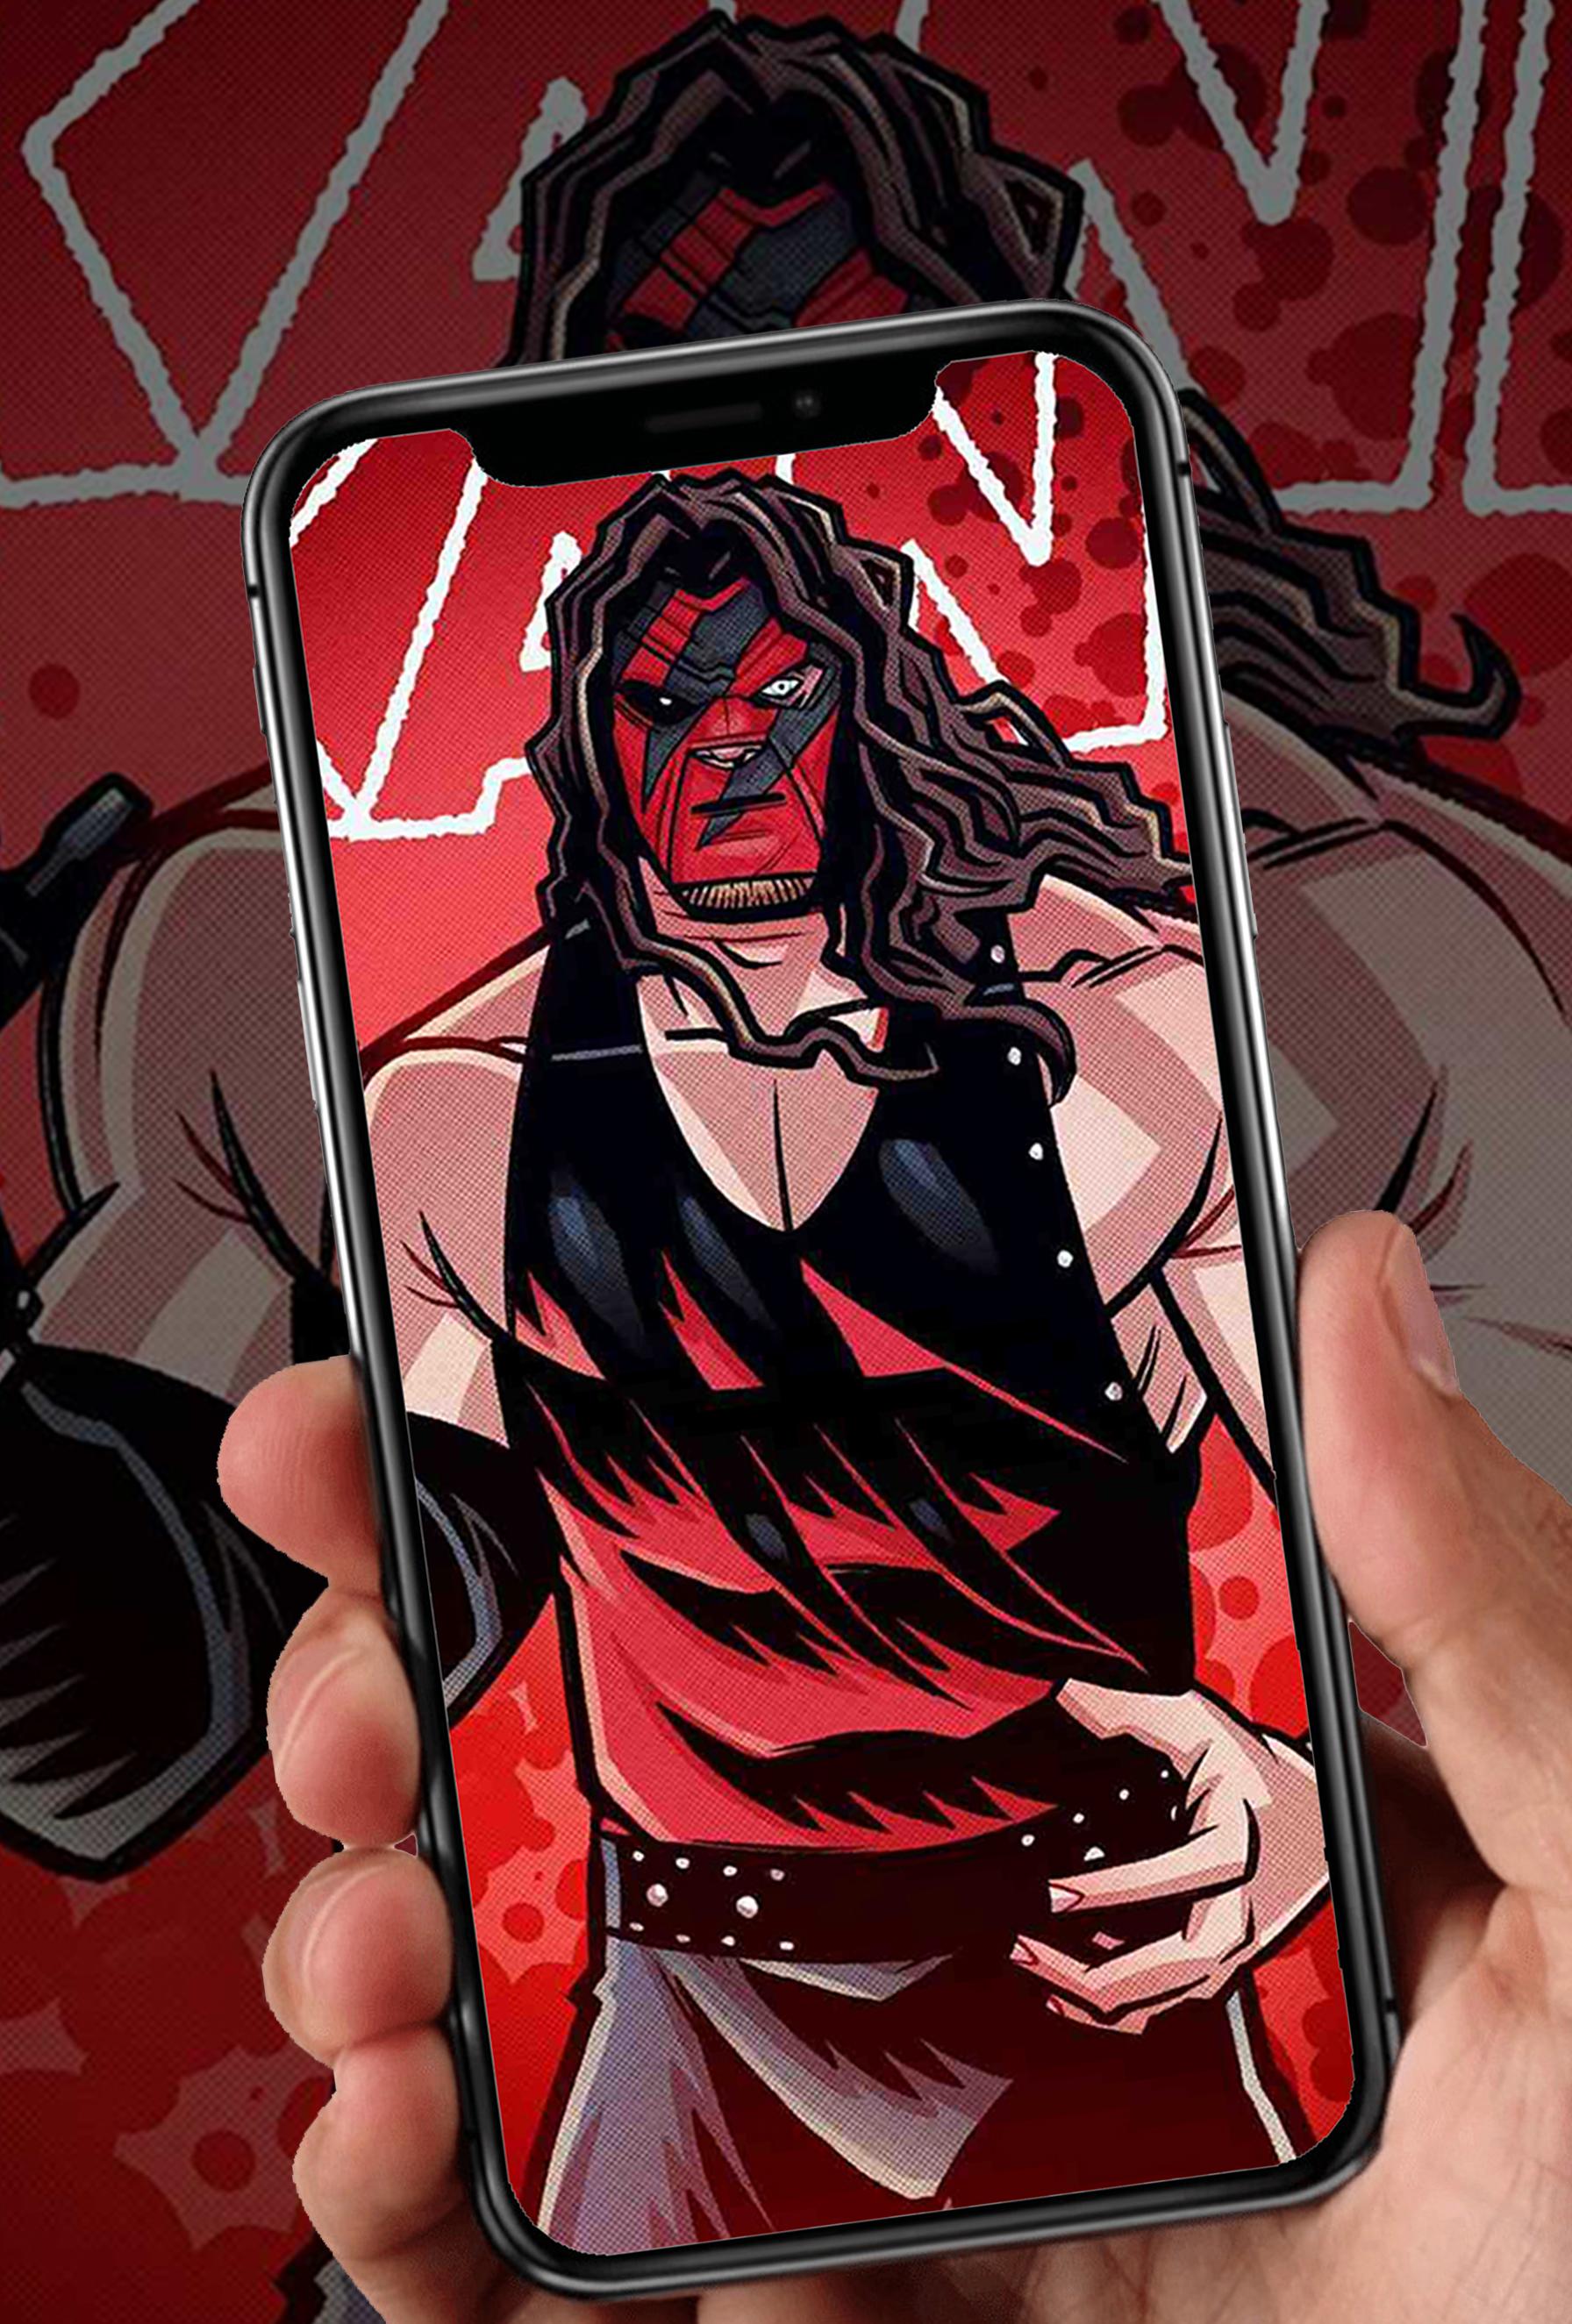 Free download WWE Cartoon Wallpapers for Android APK Download [1792x2650]  for your Desktop, Mobile & Tablet | Explore 30+ Wwe Cartoon Wallpapers | Wwe  Wallpapers, Wwe Wallpaper, Cartoon Backgrounds